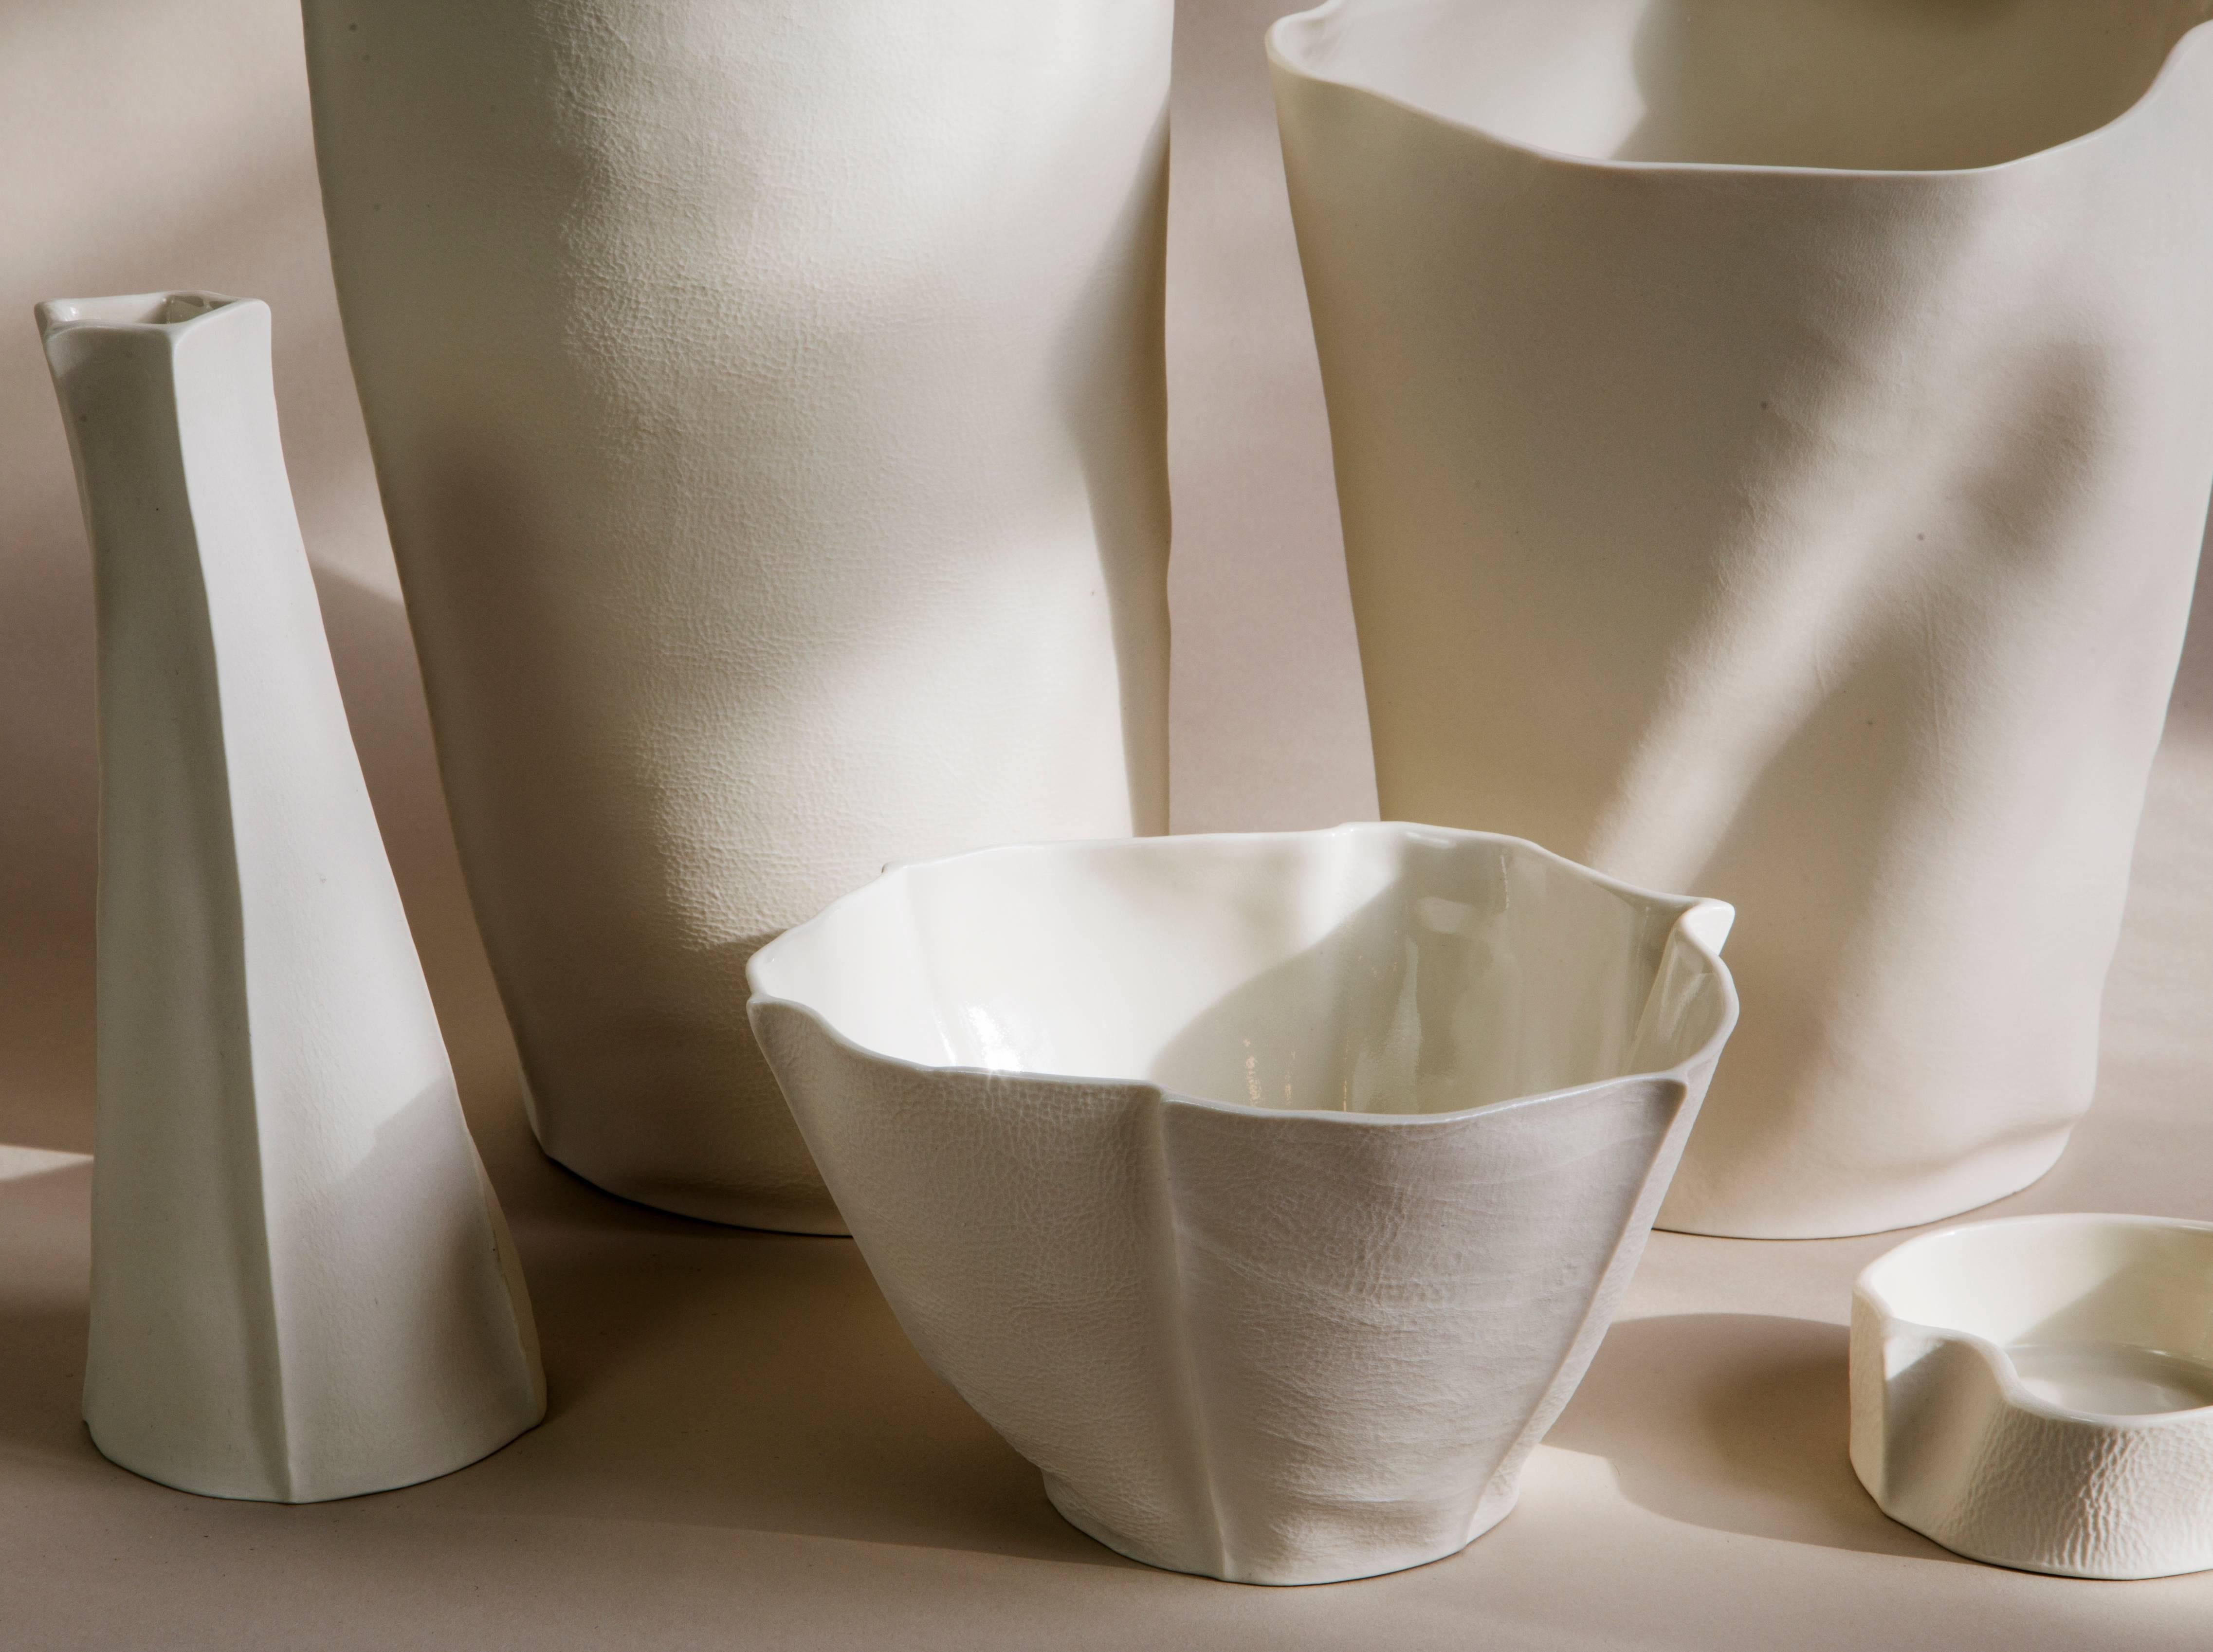 American Set of Five Kawa Porcelain Pieces, in stock